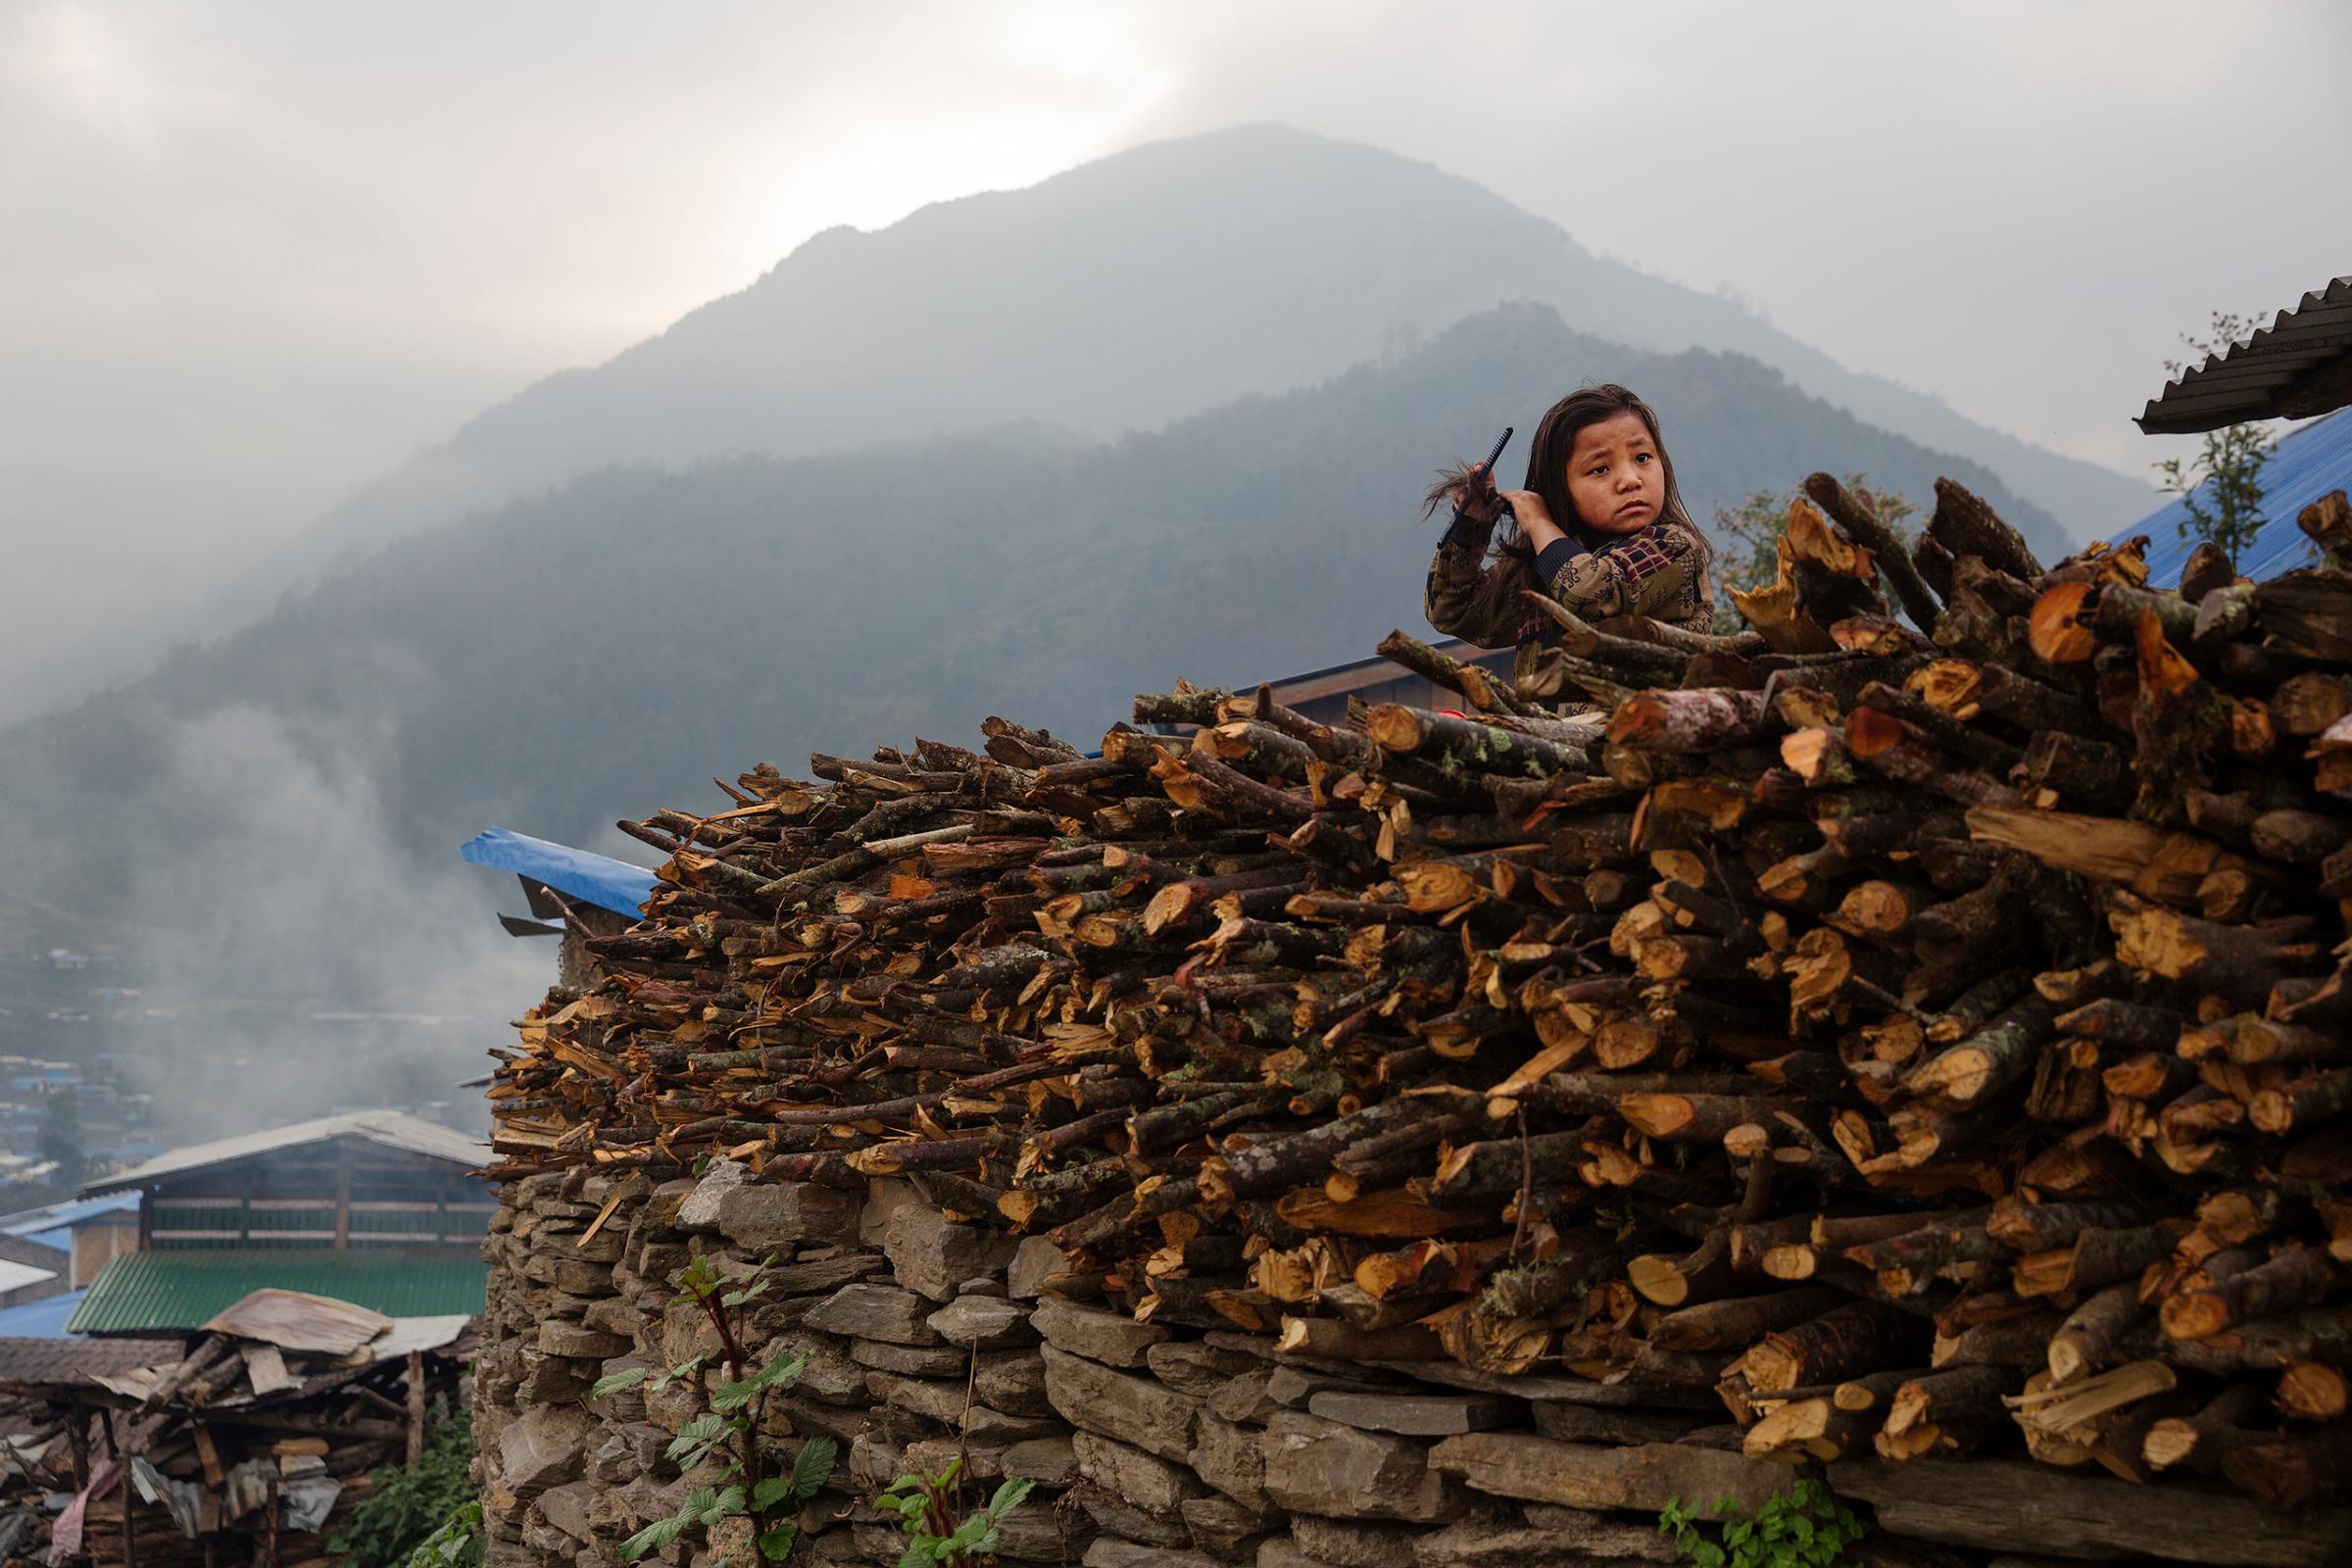 A child combs her hair in the devastated village of Barpak, in Gorkha district, Nepal, a year after the 2015 quakes which destroyed most of the town, April 5, 2016.